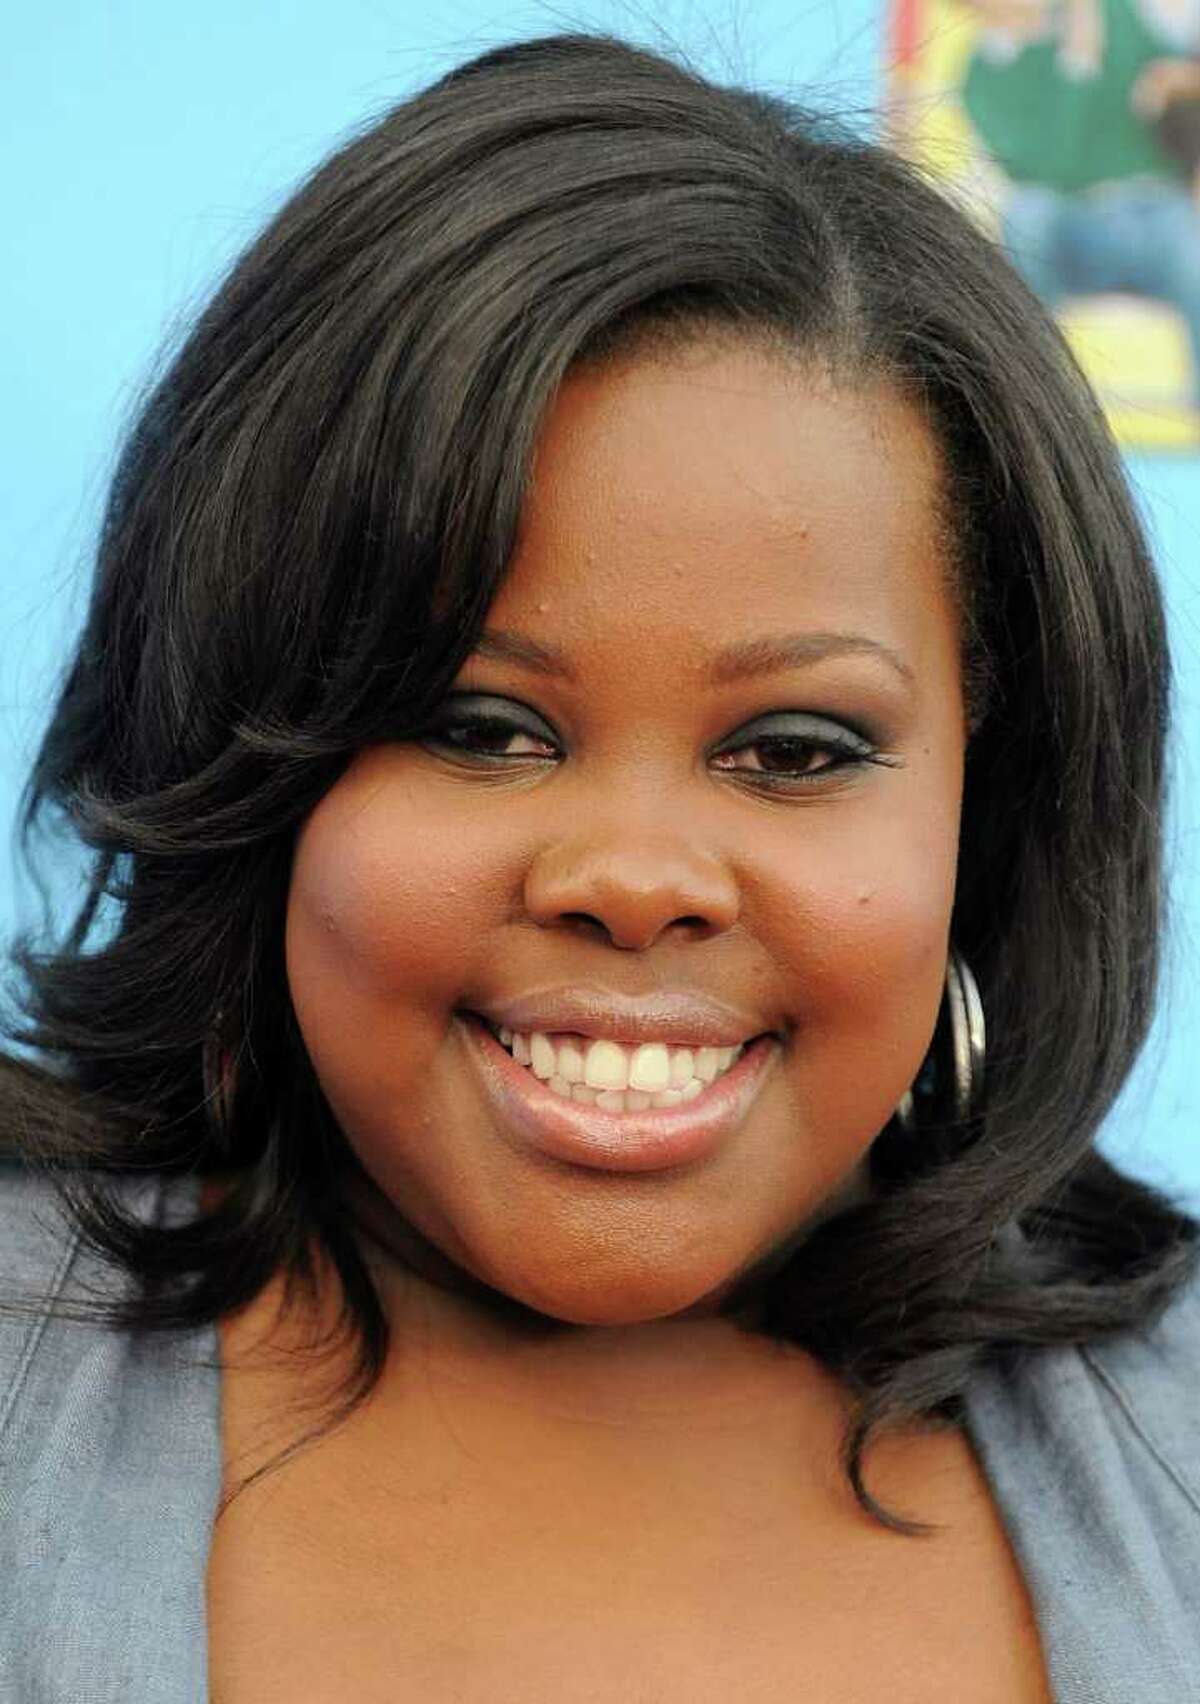 HOLLYWOOD - SEPTEMBER 07: Actress Amber Riley arrives at the premiere of 20th Century Fox's "Glee" Season 2 held at Paramount Studios on September 7, 2010 in Hollywood, California. (Photo by Kevin Winter/Getty Images) *** Local Caption *** Amber Riley